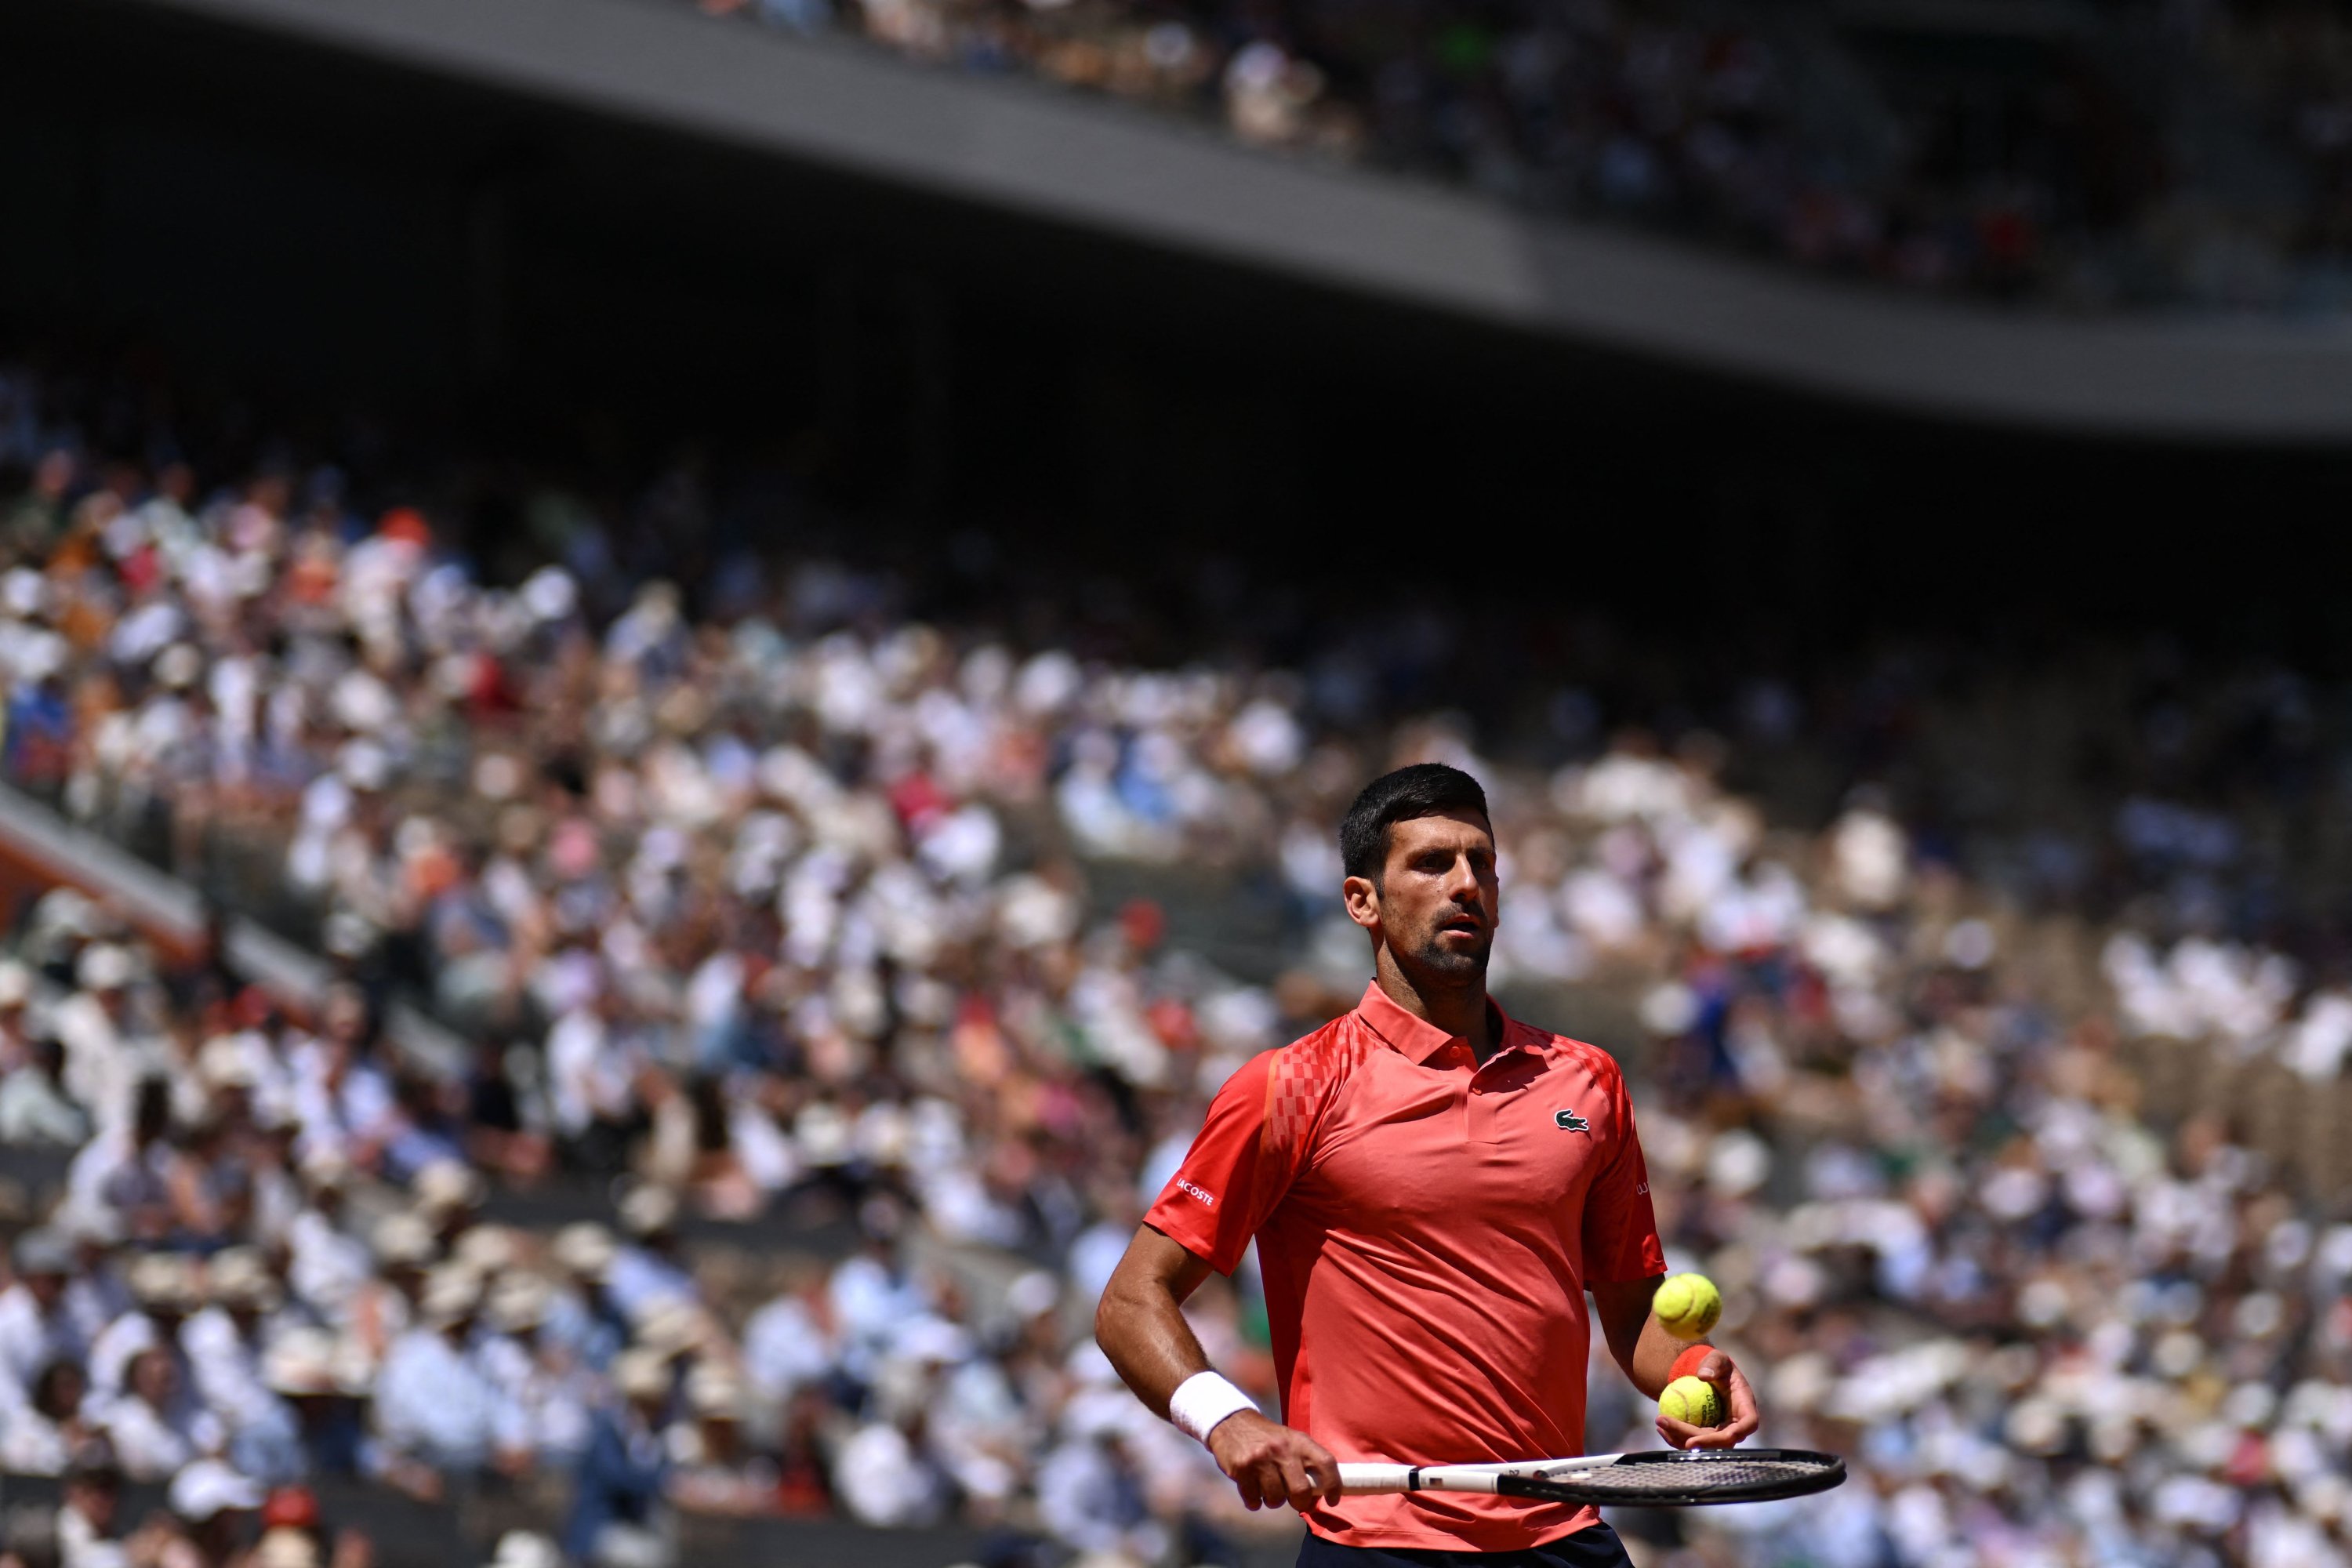 Serbian Djokovic stirs row with Kosovo message at French Open | Daily Sabah